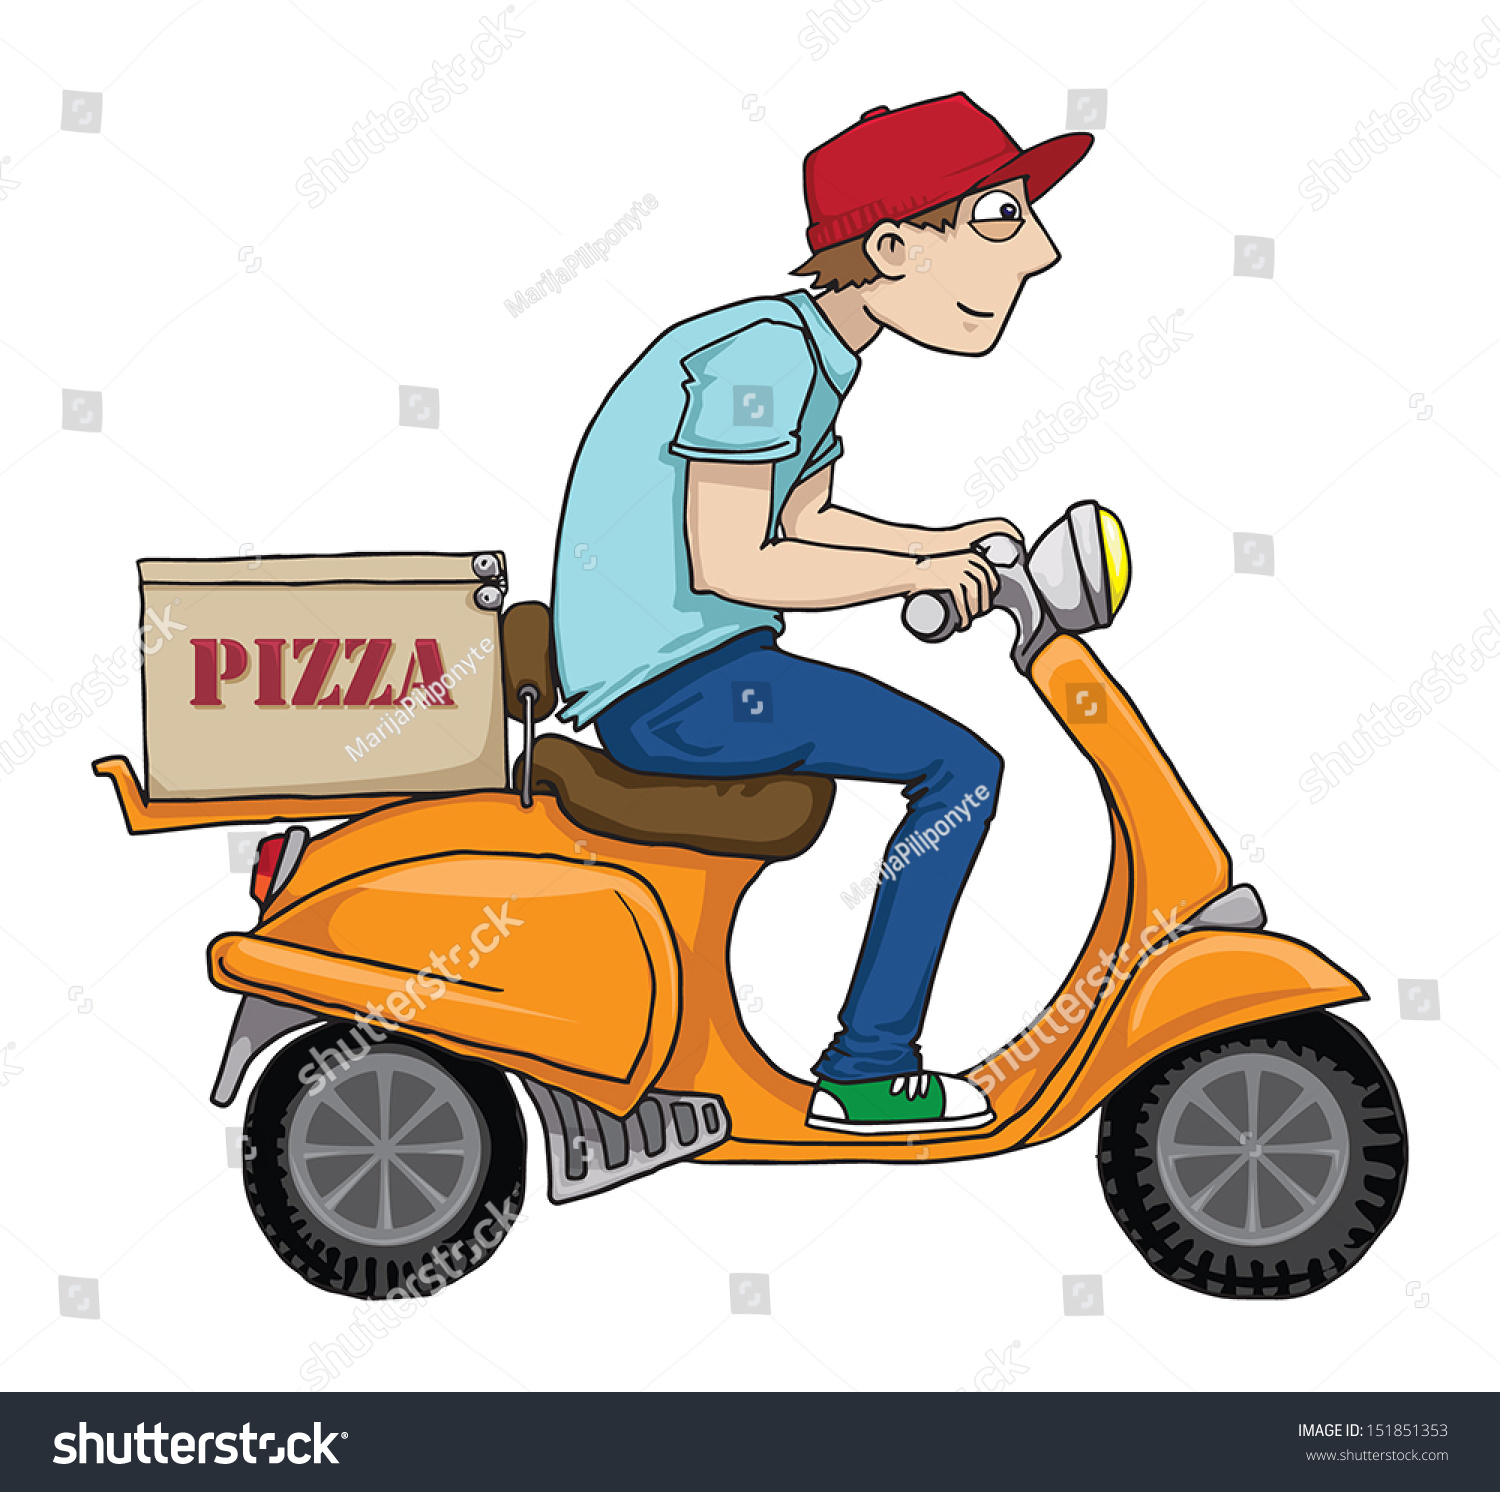 Pizza Delivery Scooter Cartoon Vector Illustration Stock Vector Shutterstock